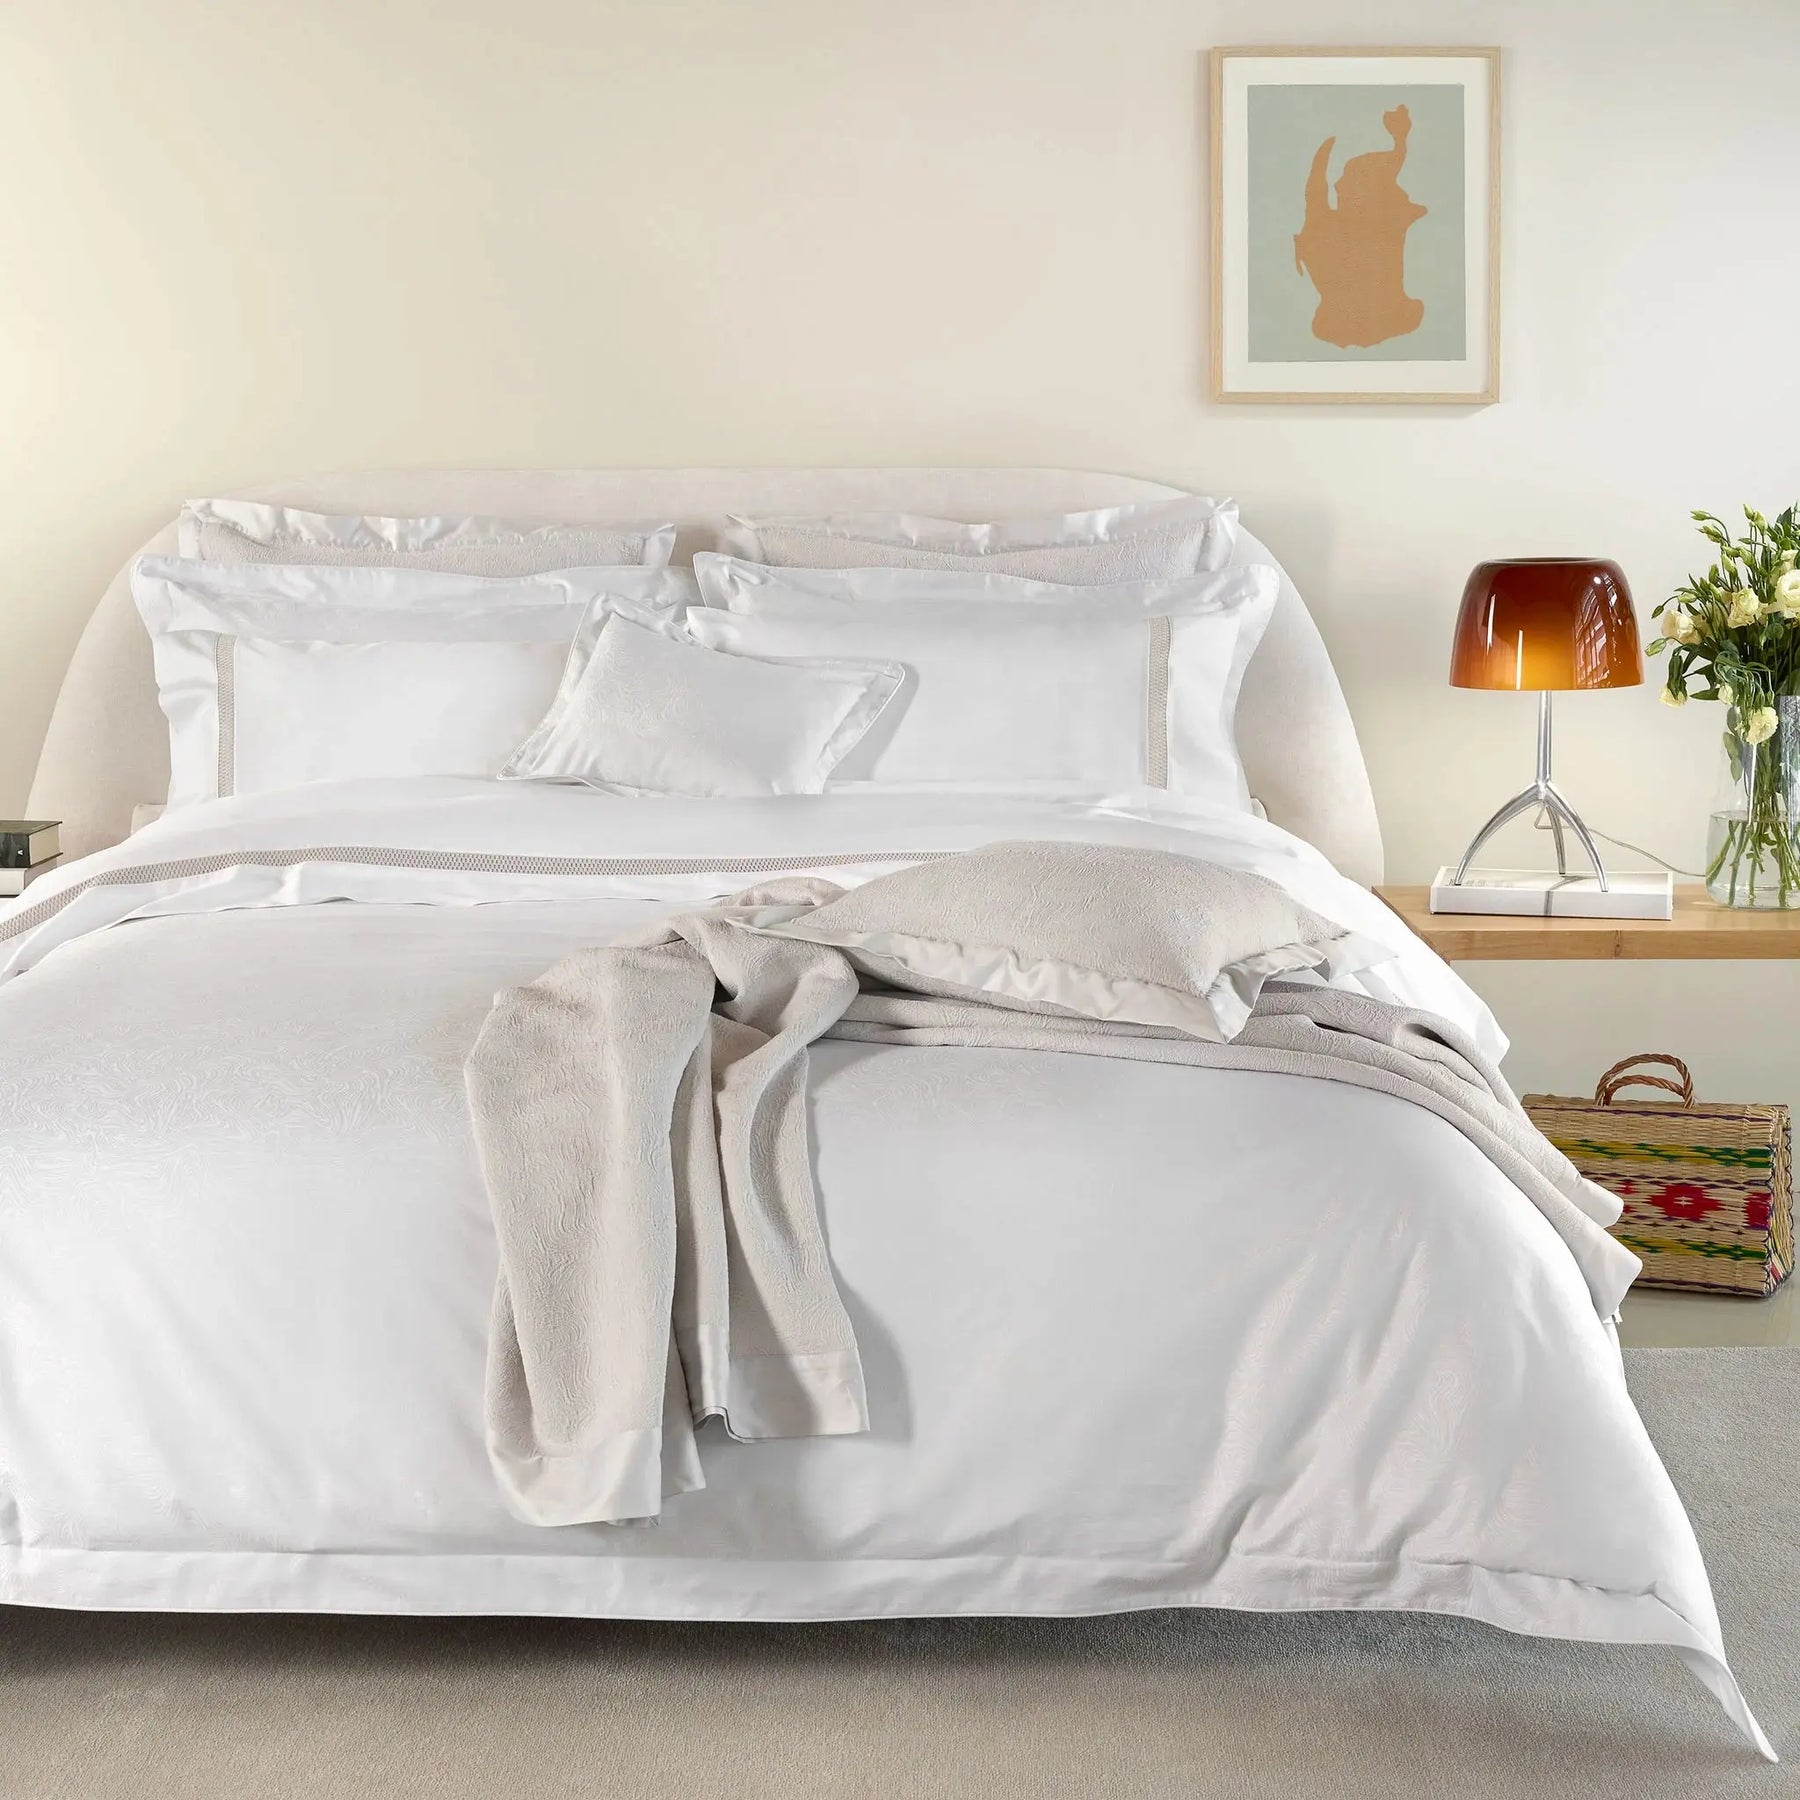 Amalia Home Caravela bedding Collection in Pale Grey in a room